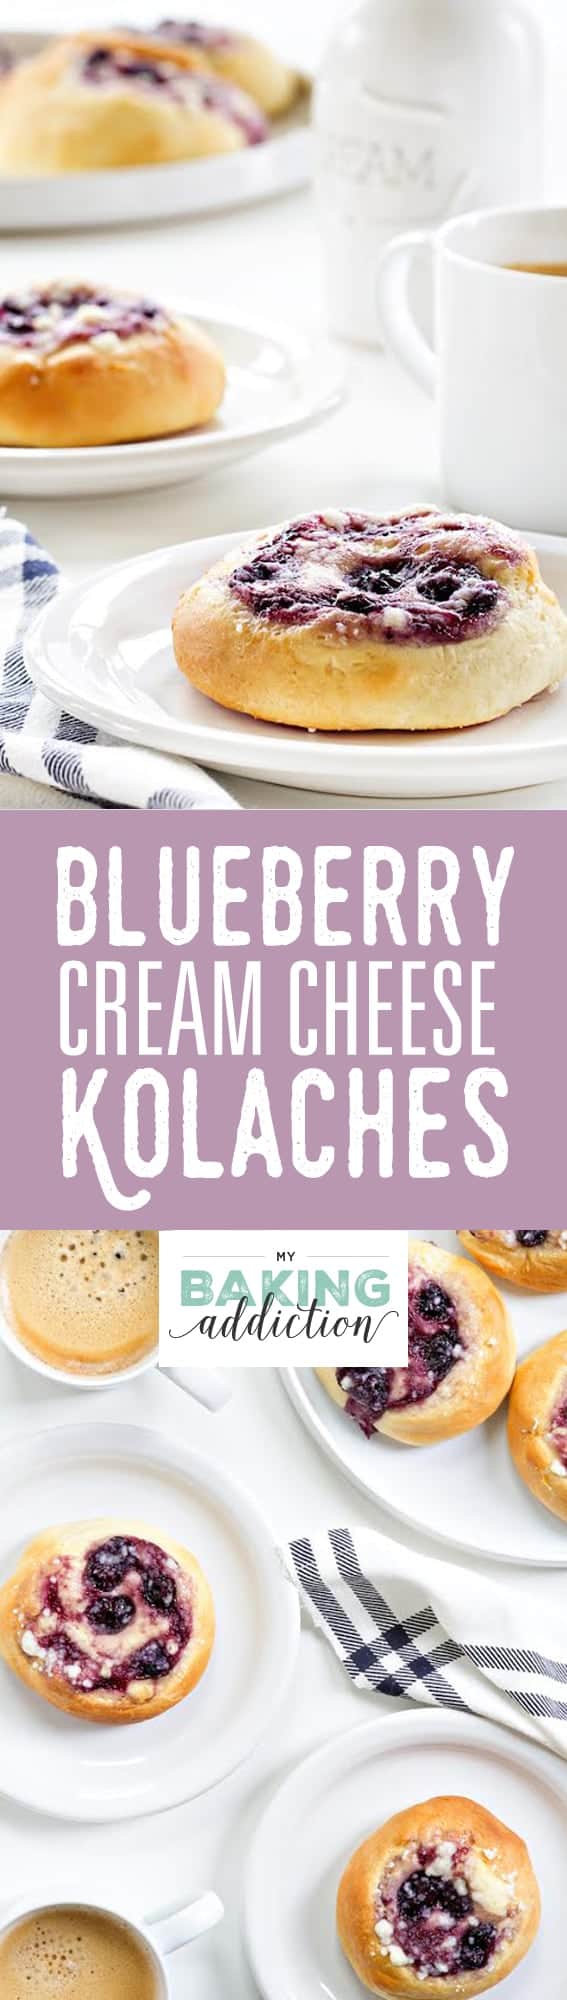 Blueberry Cream Cheese Kolaches are an amazing pastry you must try. Sweet, savory, and completely delightful!